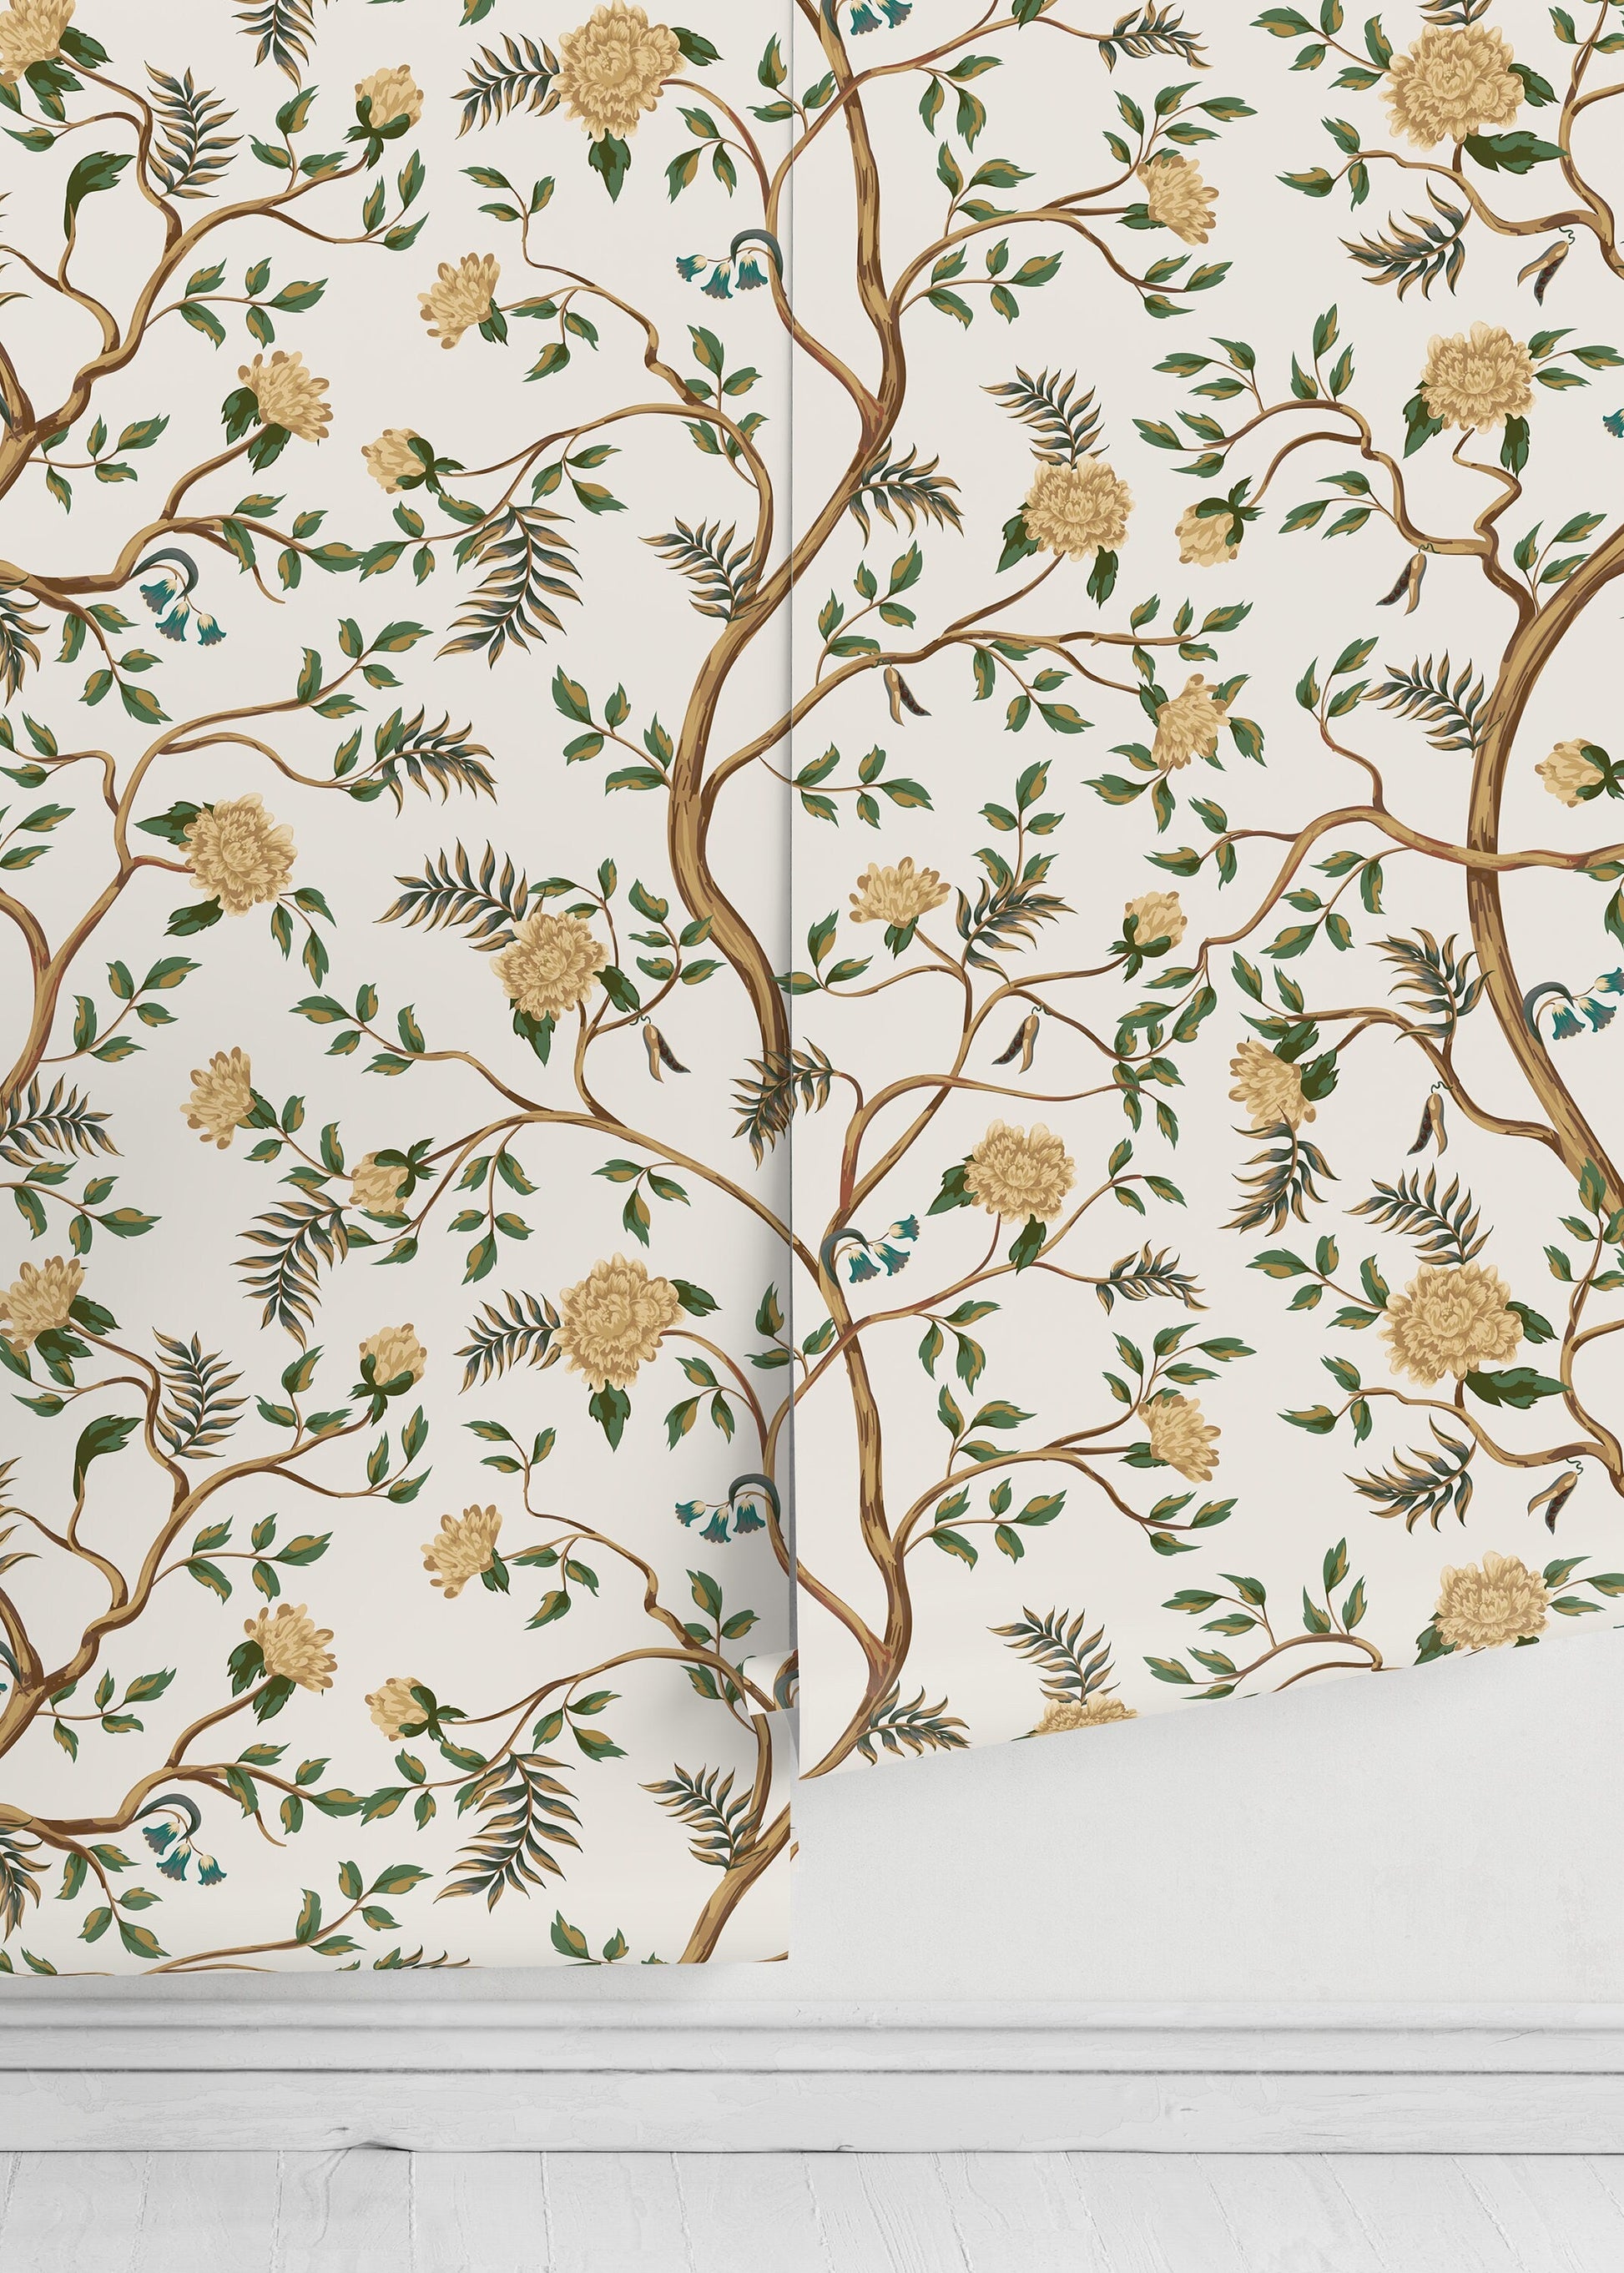 Floral Chinoiserie Wallpaper / Peel and Stick Wallpaper Removable Wallpaper Home Decor Wall Art Wall Decor Room Decor - D503